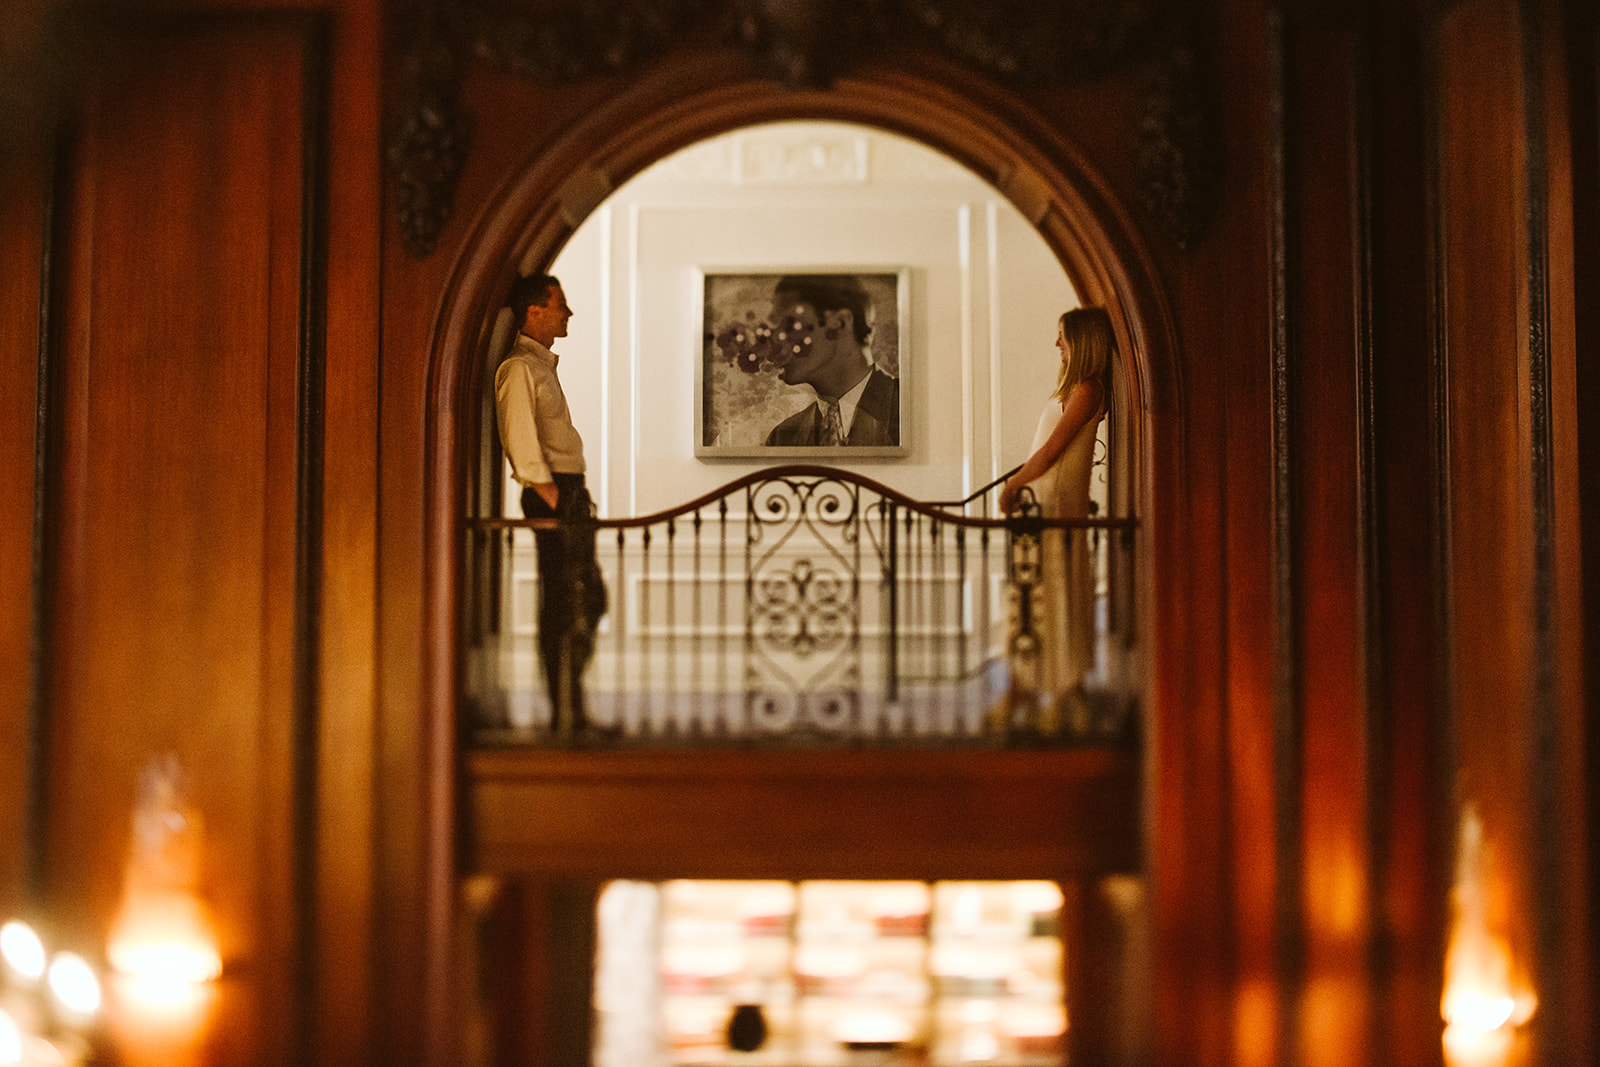 A bride and groom pose together in an archway on the landing of an old staircase.